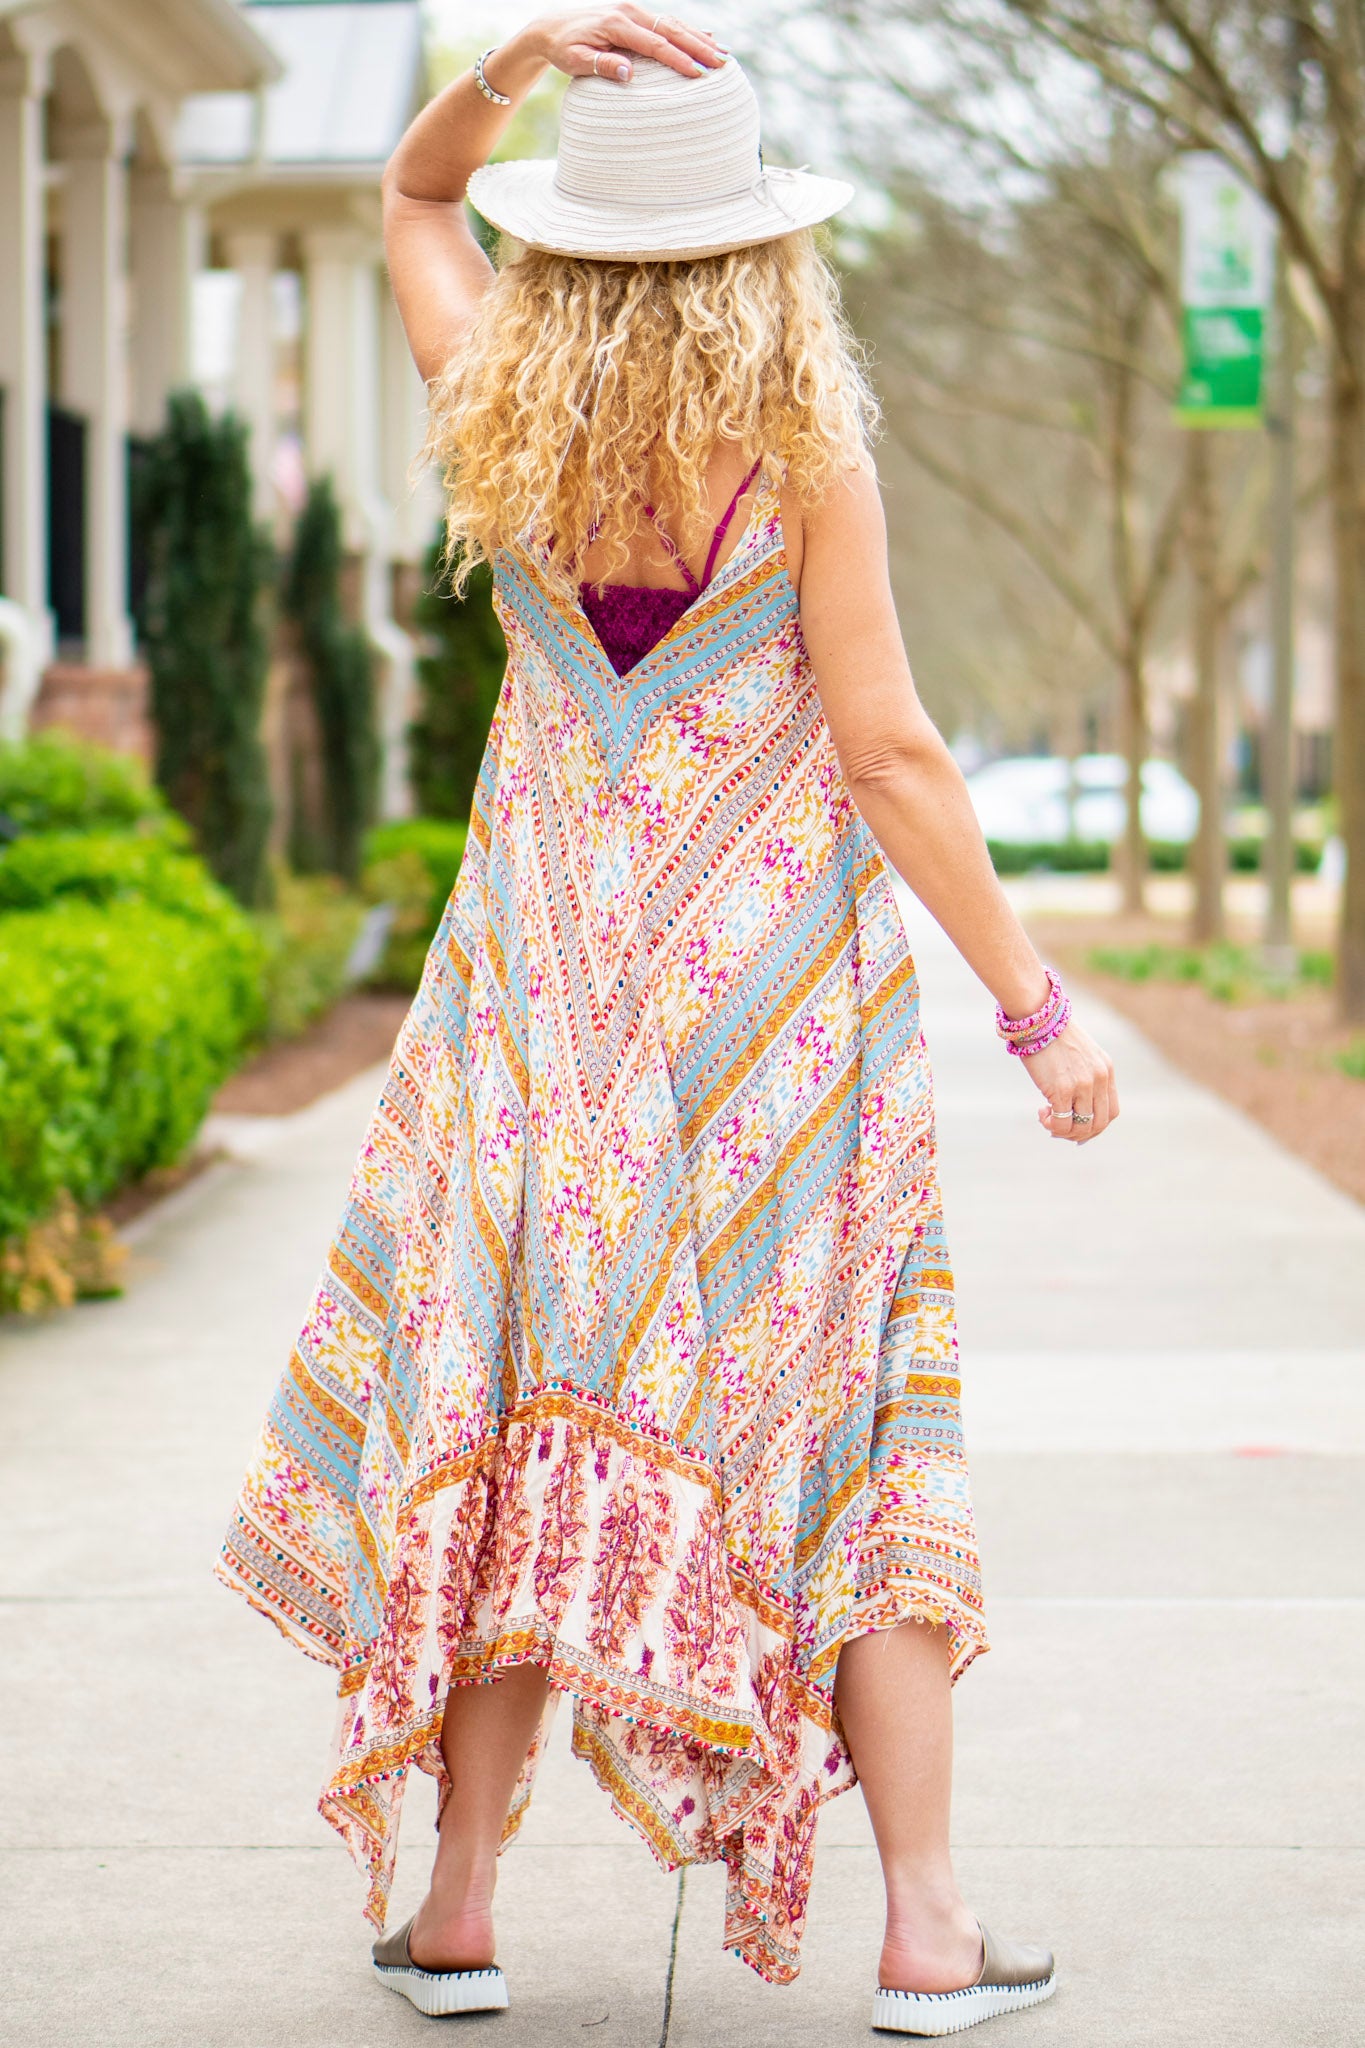 The Jules Dress in Ivory - SpiritedBoutiques Boho Hippie Boutique Style Dress, Angie